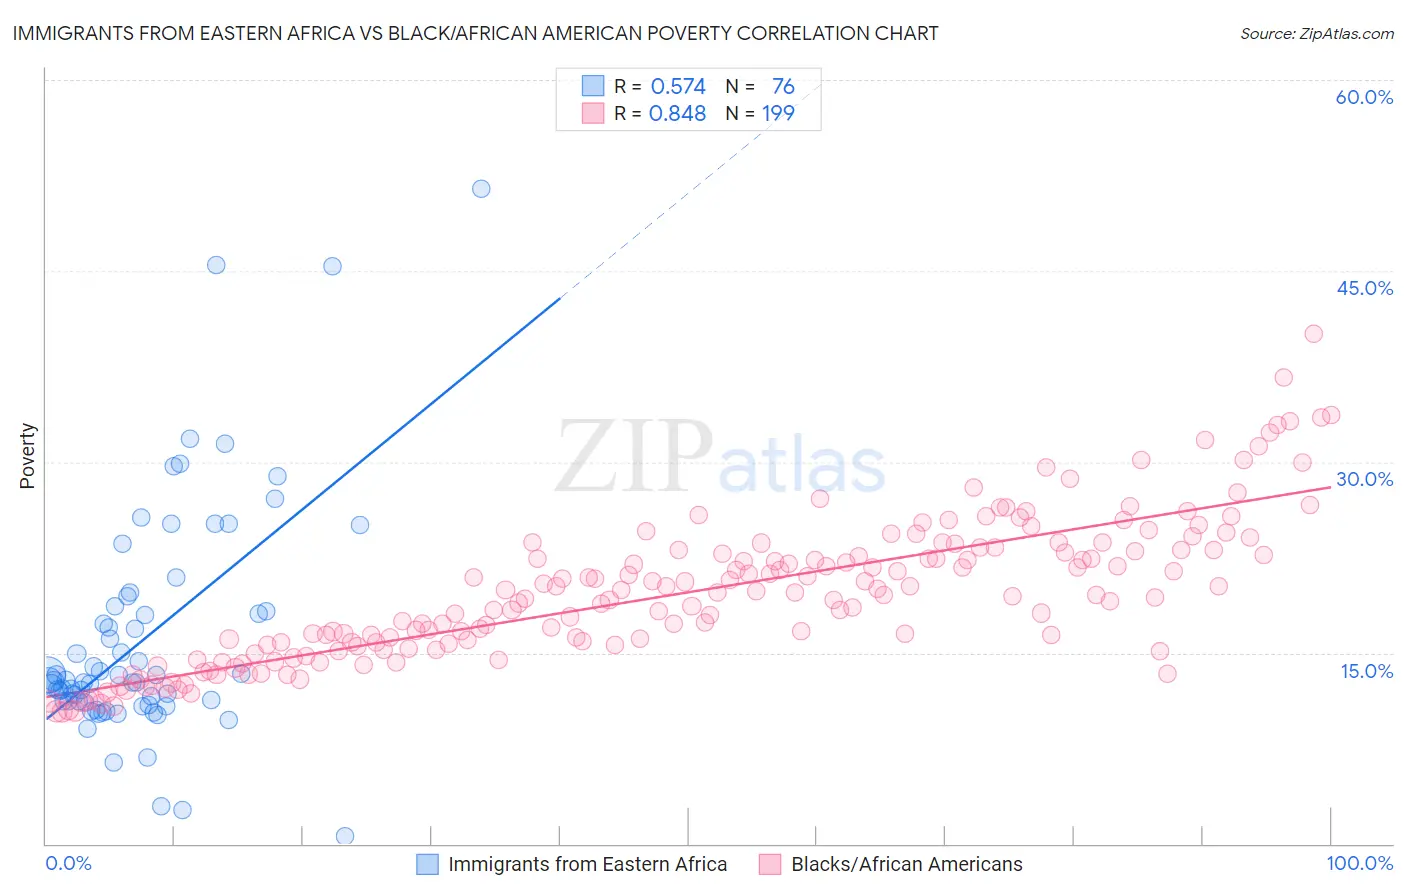 Immigrants from Eastern Africa vs Black/African American Poverty